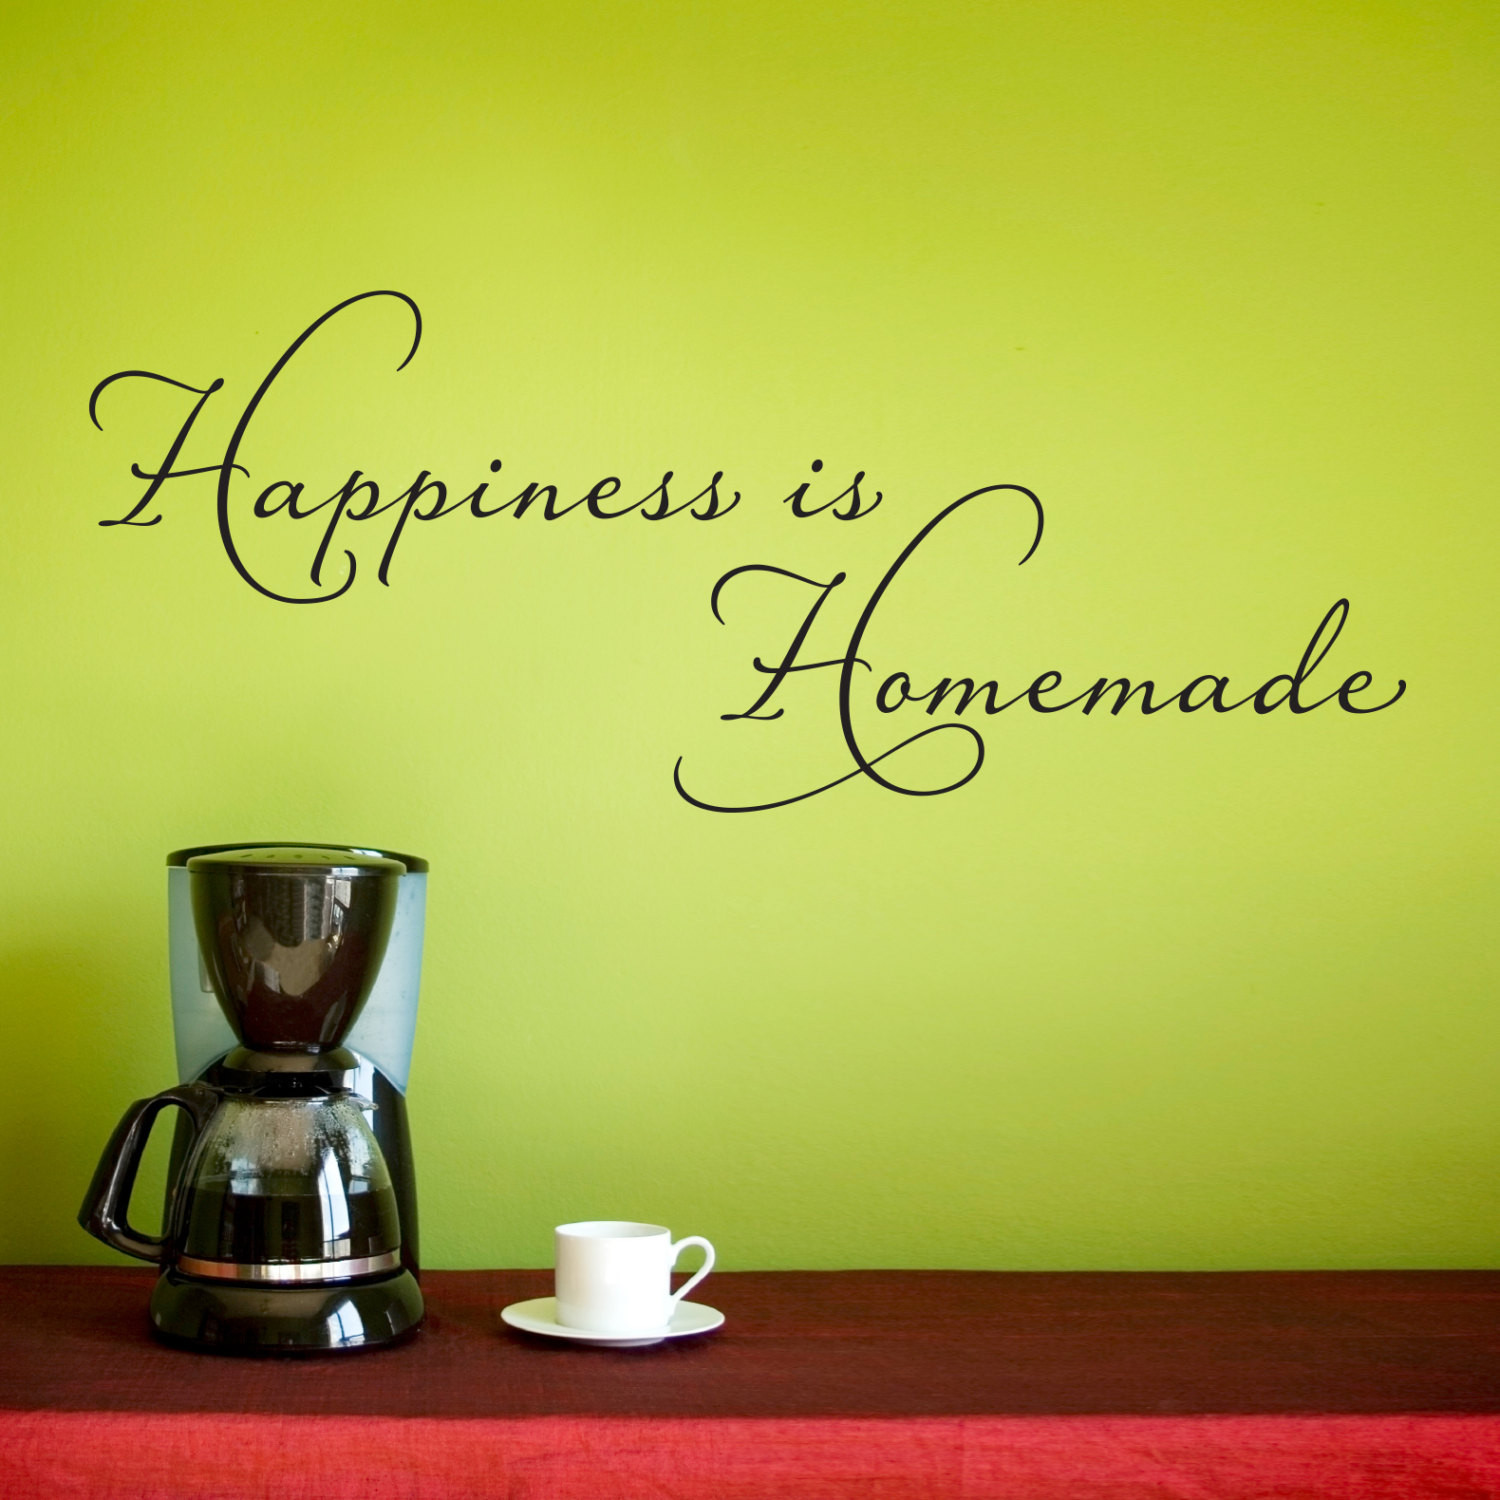 Kitchen Wall Decal Quotes
 Happiness is Homemade Wall Decal Kitchen Wall Sticker